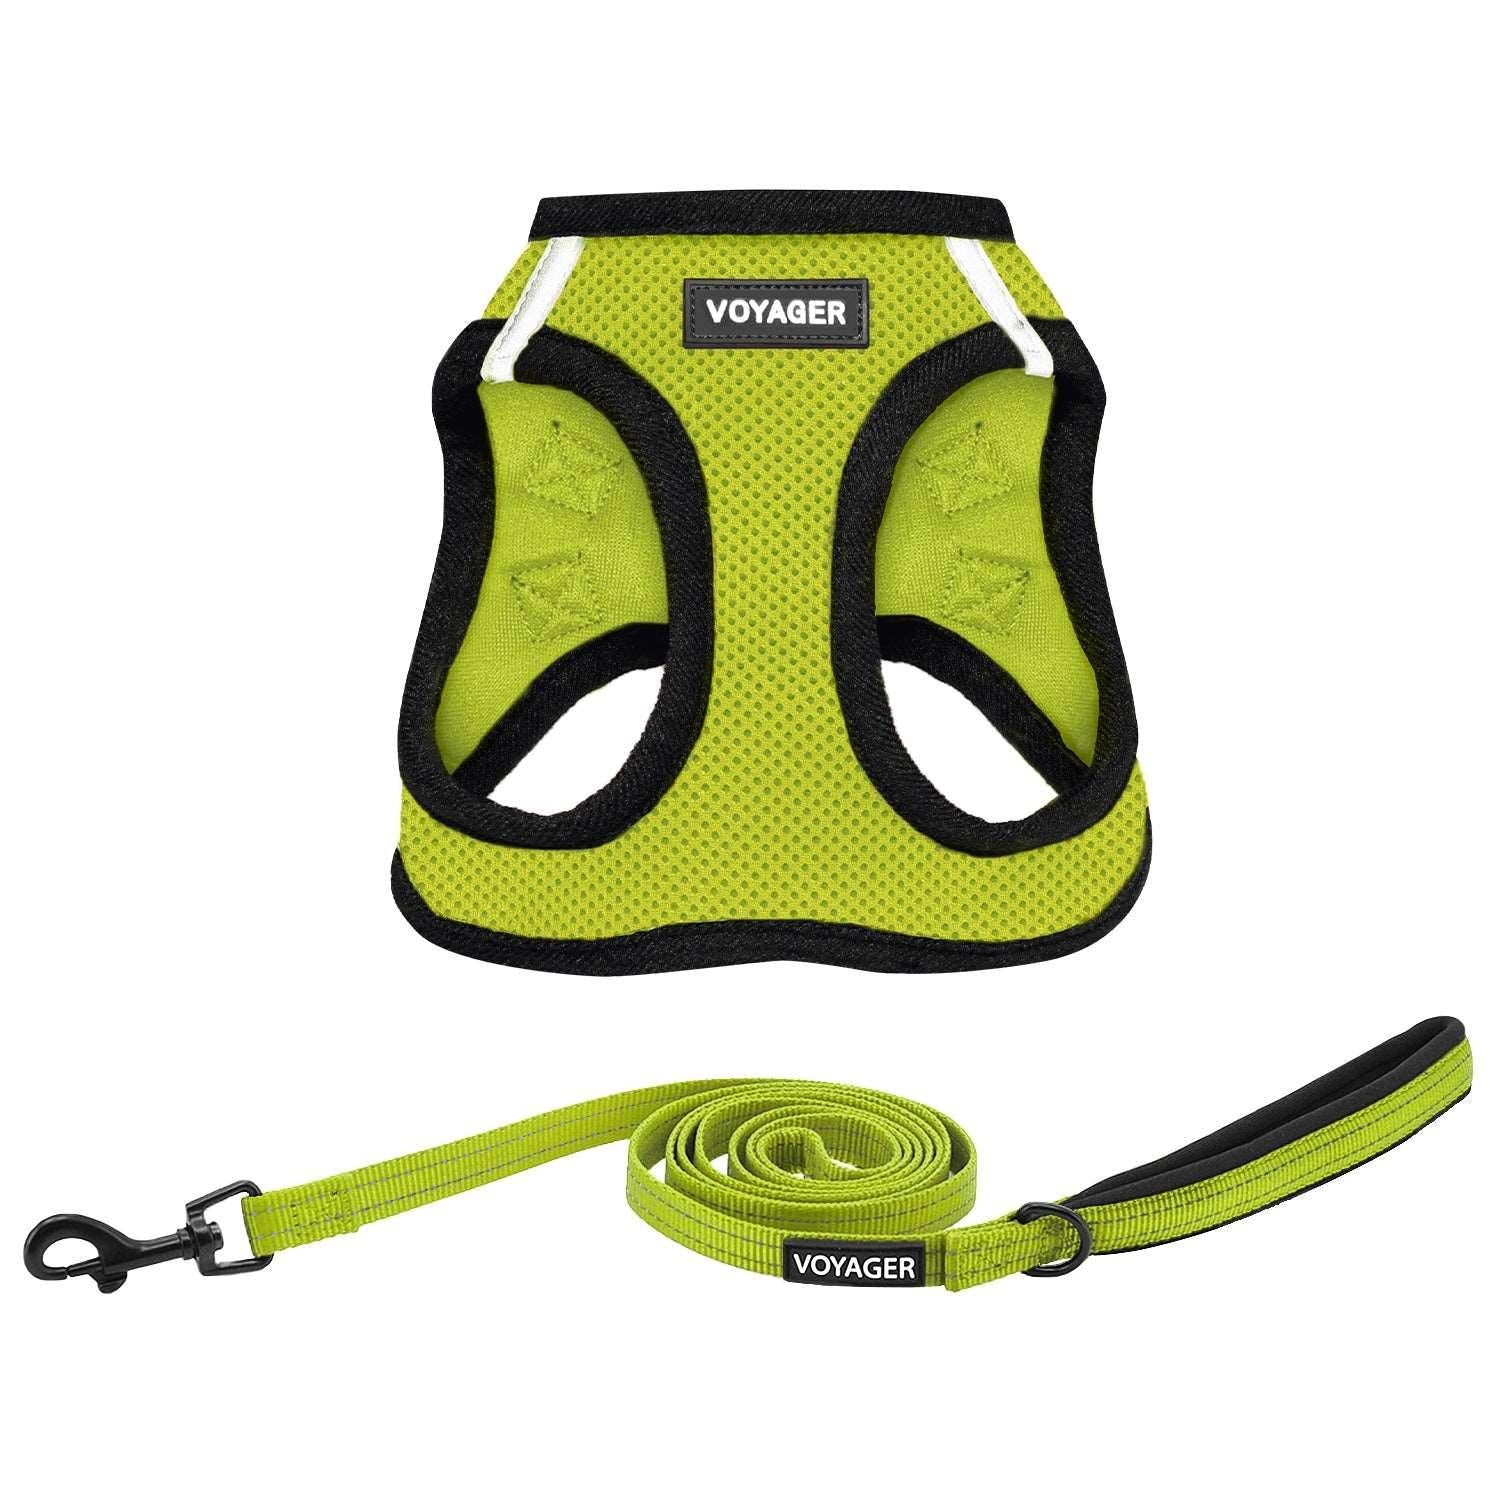 Step-in Air Harness & Leash Combo Set